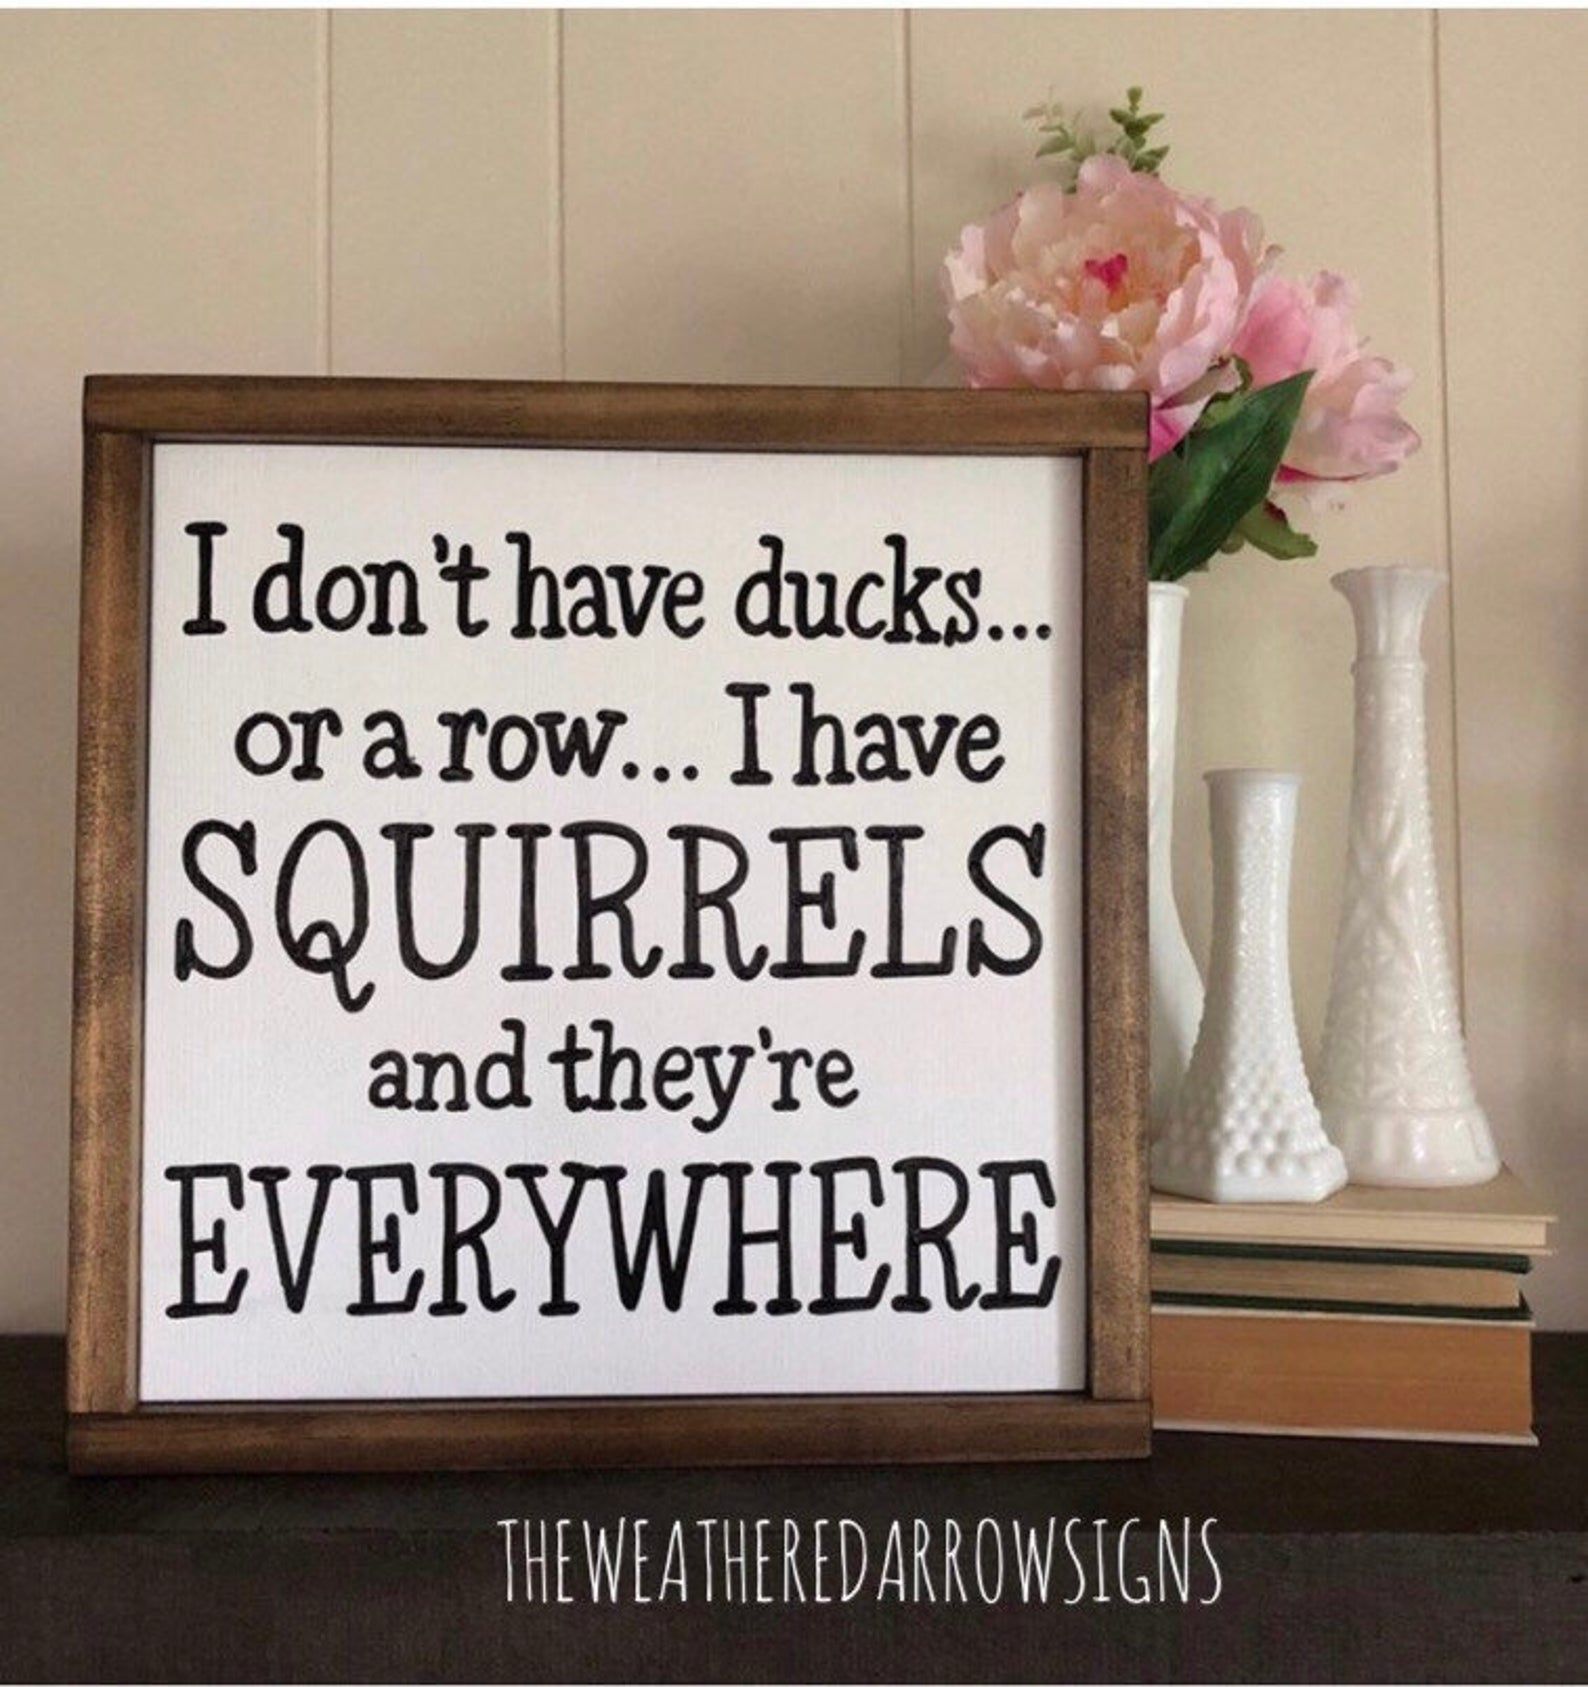 I don't have ducks... or a row... I have SQUIRRELS and they're EVERYWHERE - Framed - Wood sign -   18 home decor signs funny ideas